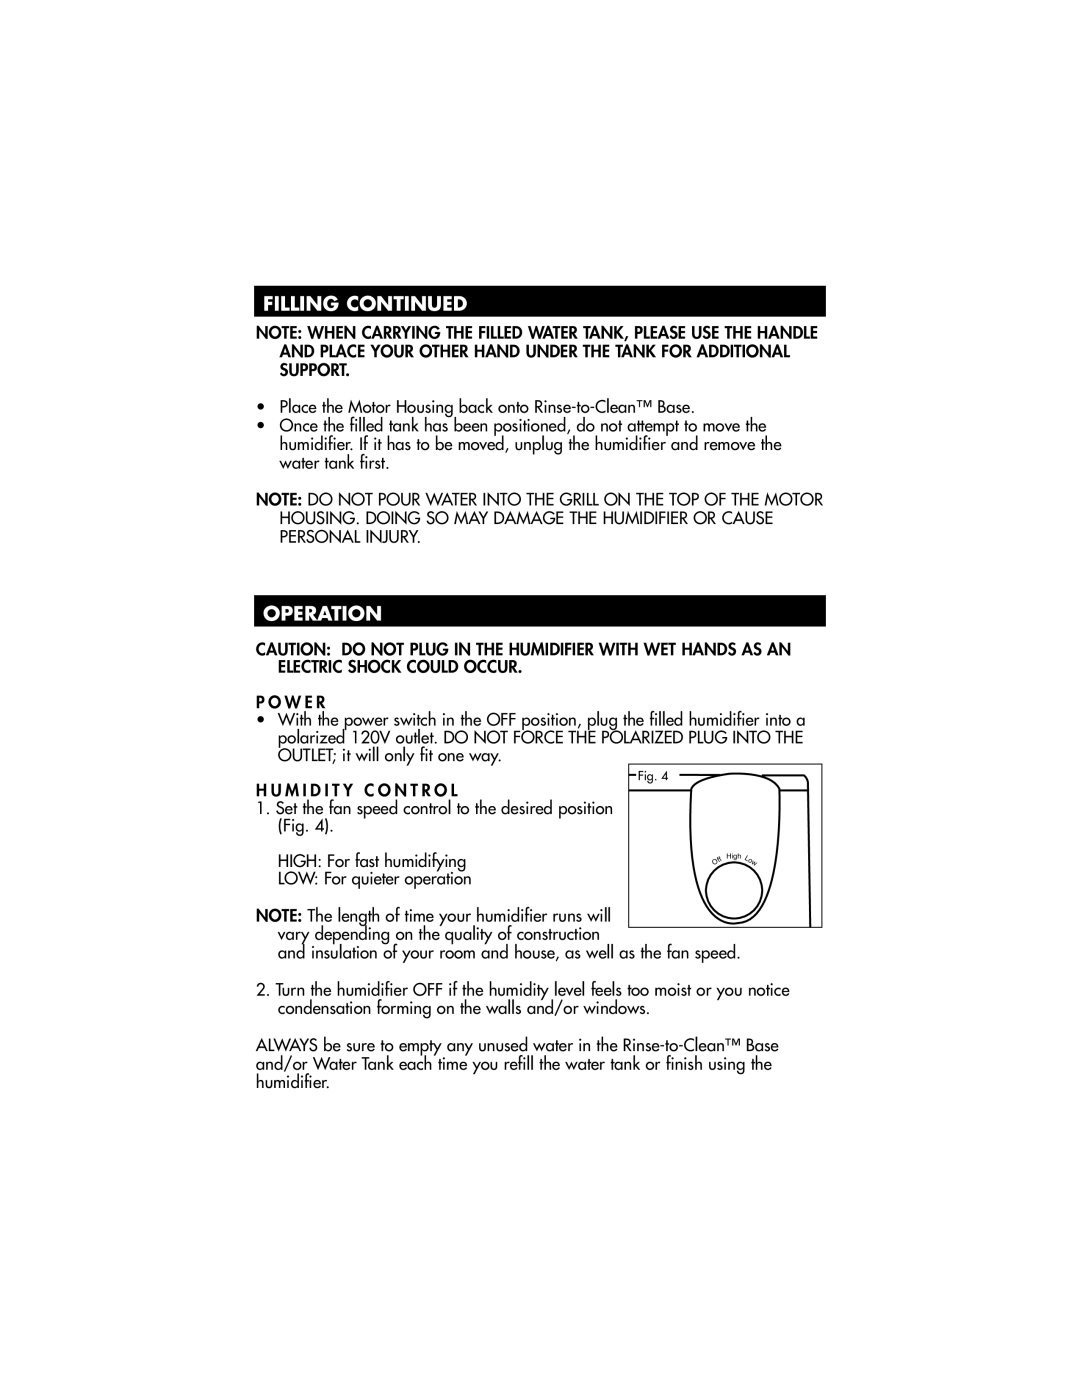 Honeywell HCM-890 owner manual Filling Continued, Operation 